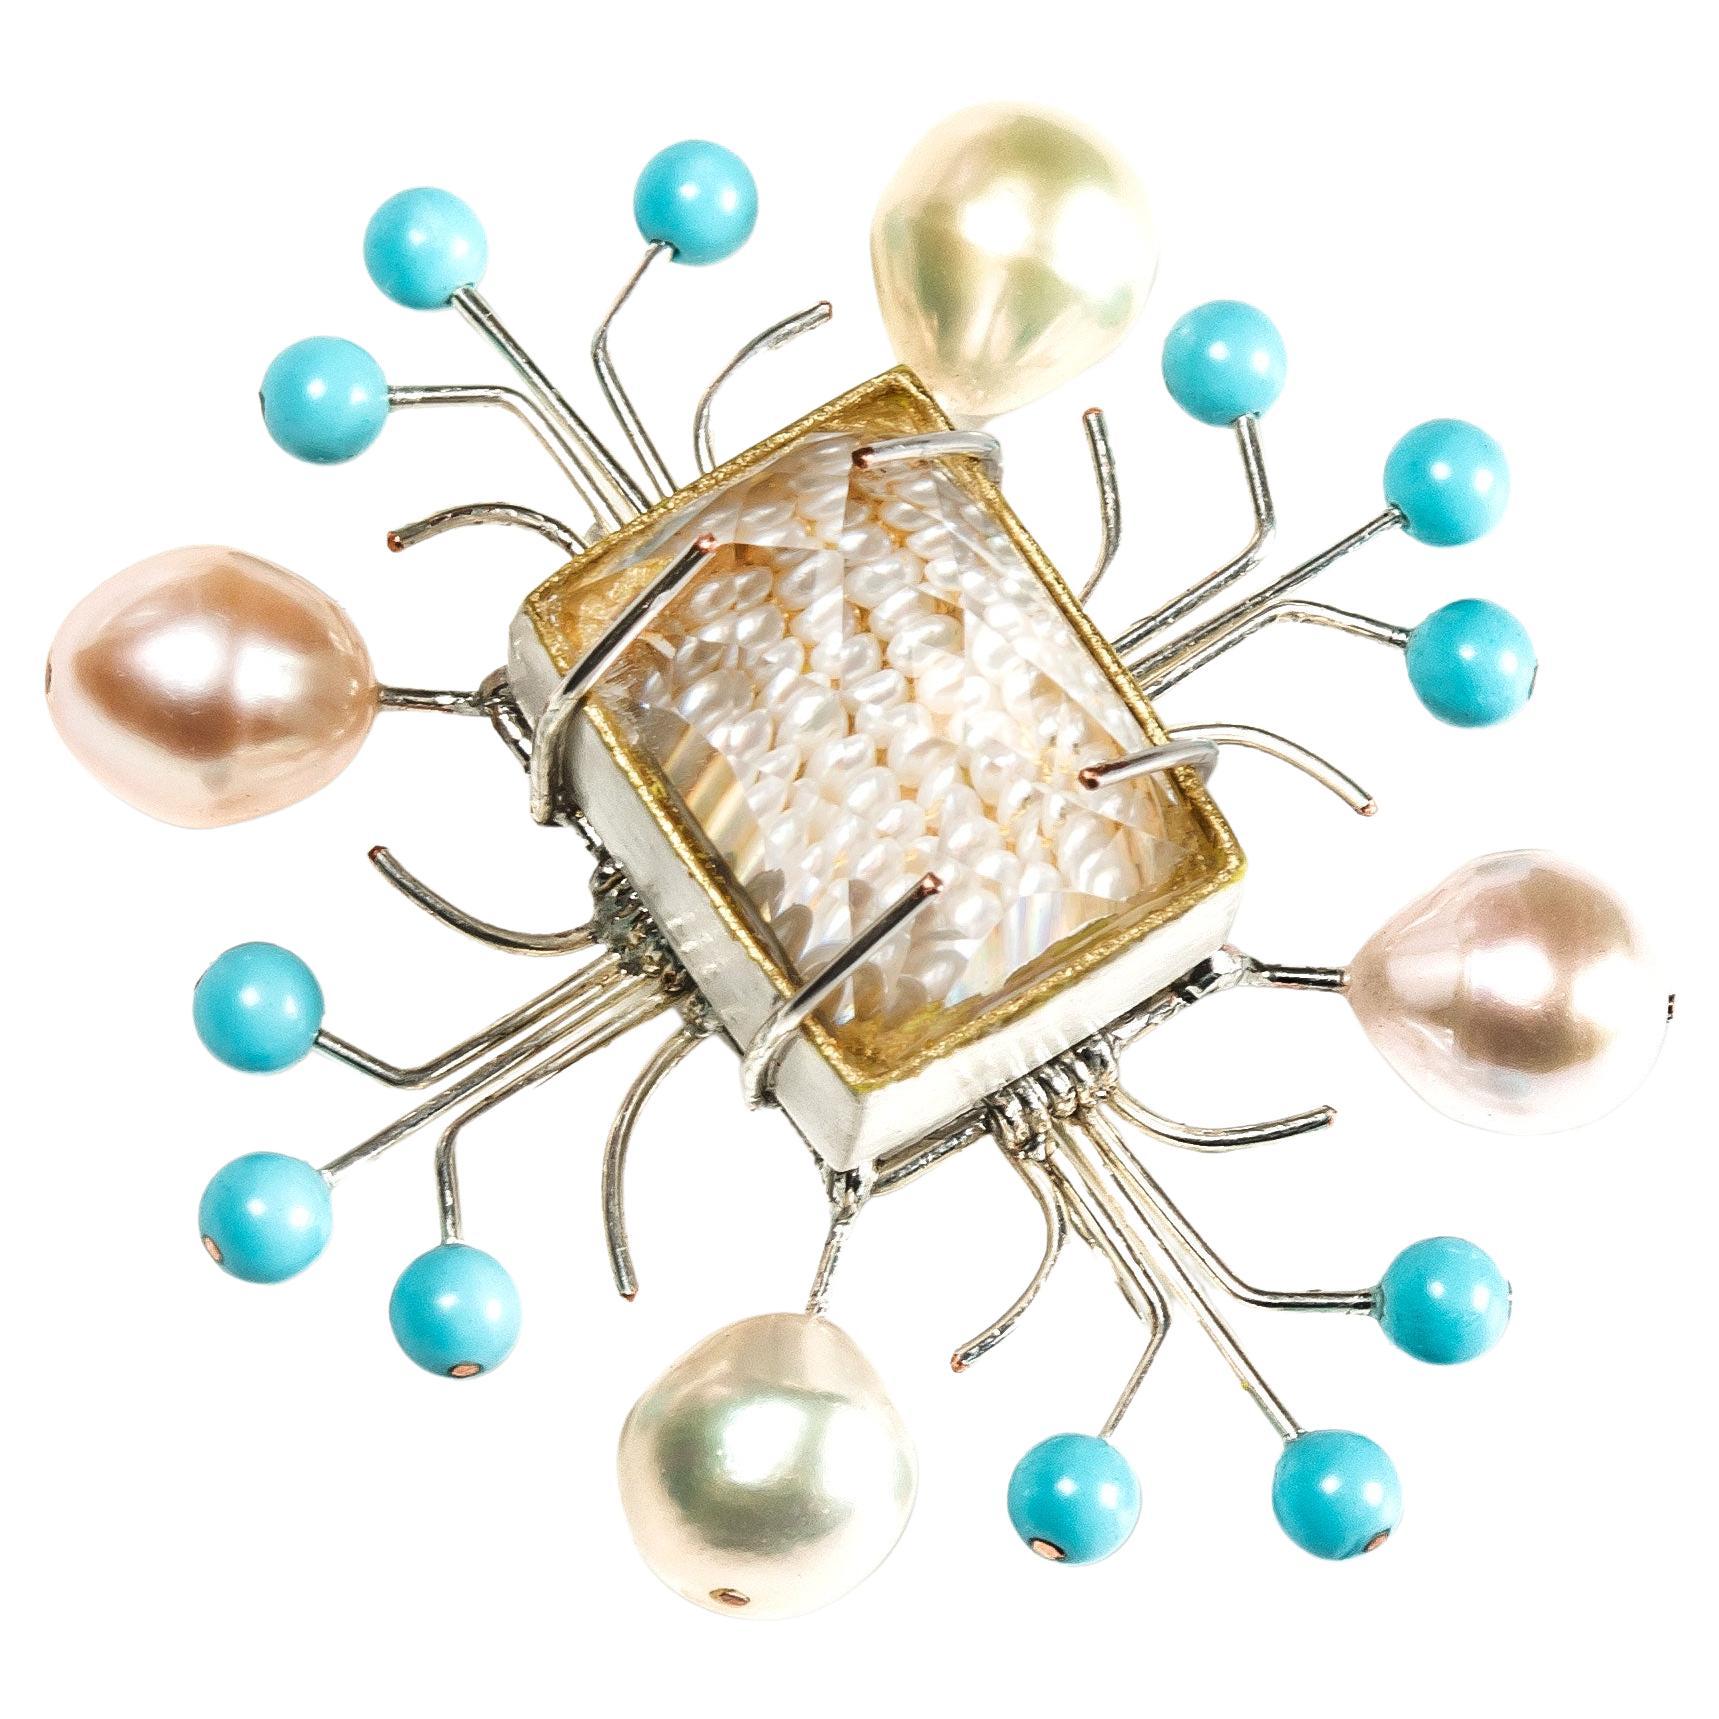 Bodyfurnitures Brooch: Double View Rock Crystal with Pearls, Silver, Turquoise